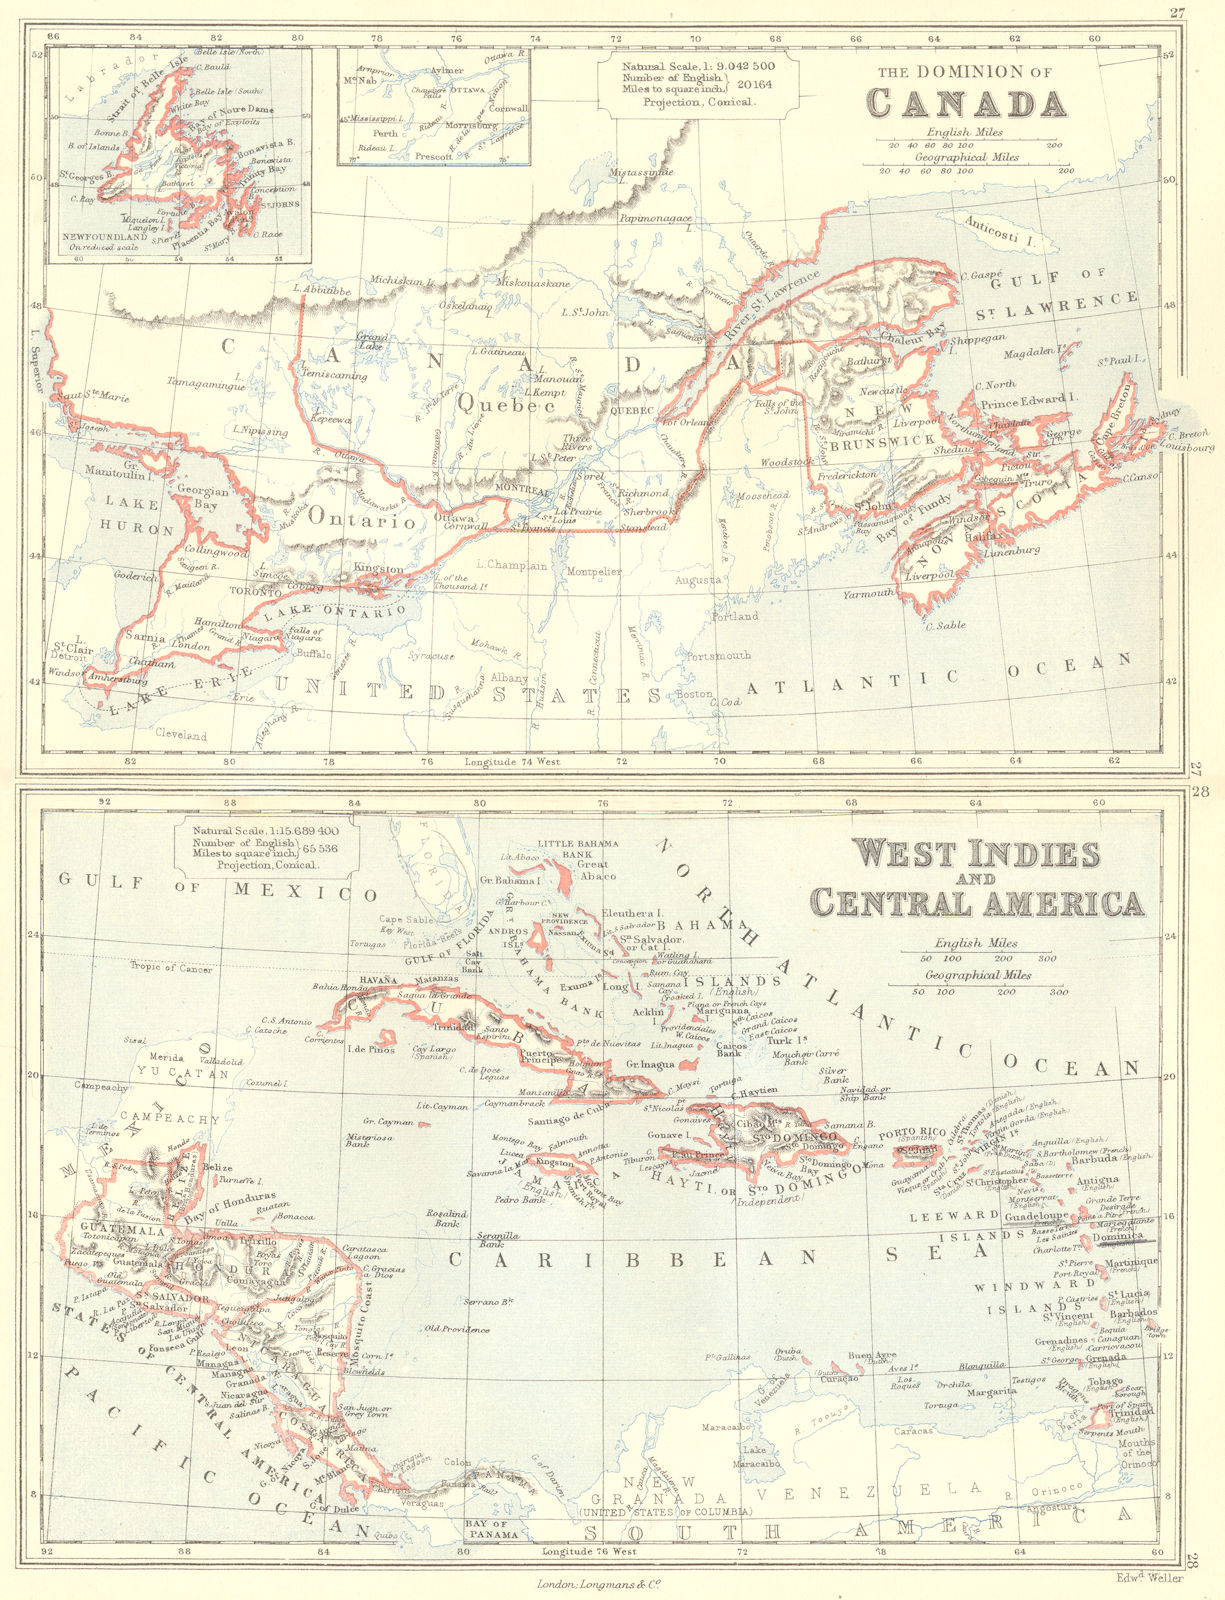 Associate Product CANADA/WEST INDIES/CENTRAL AMERICA. Showing Canadian states. BUTLER 1888 map